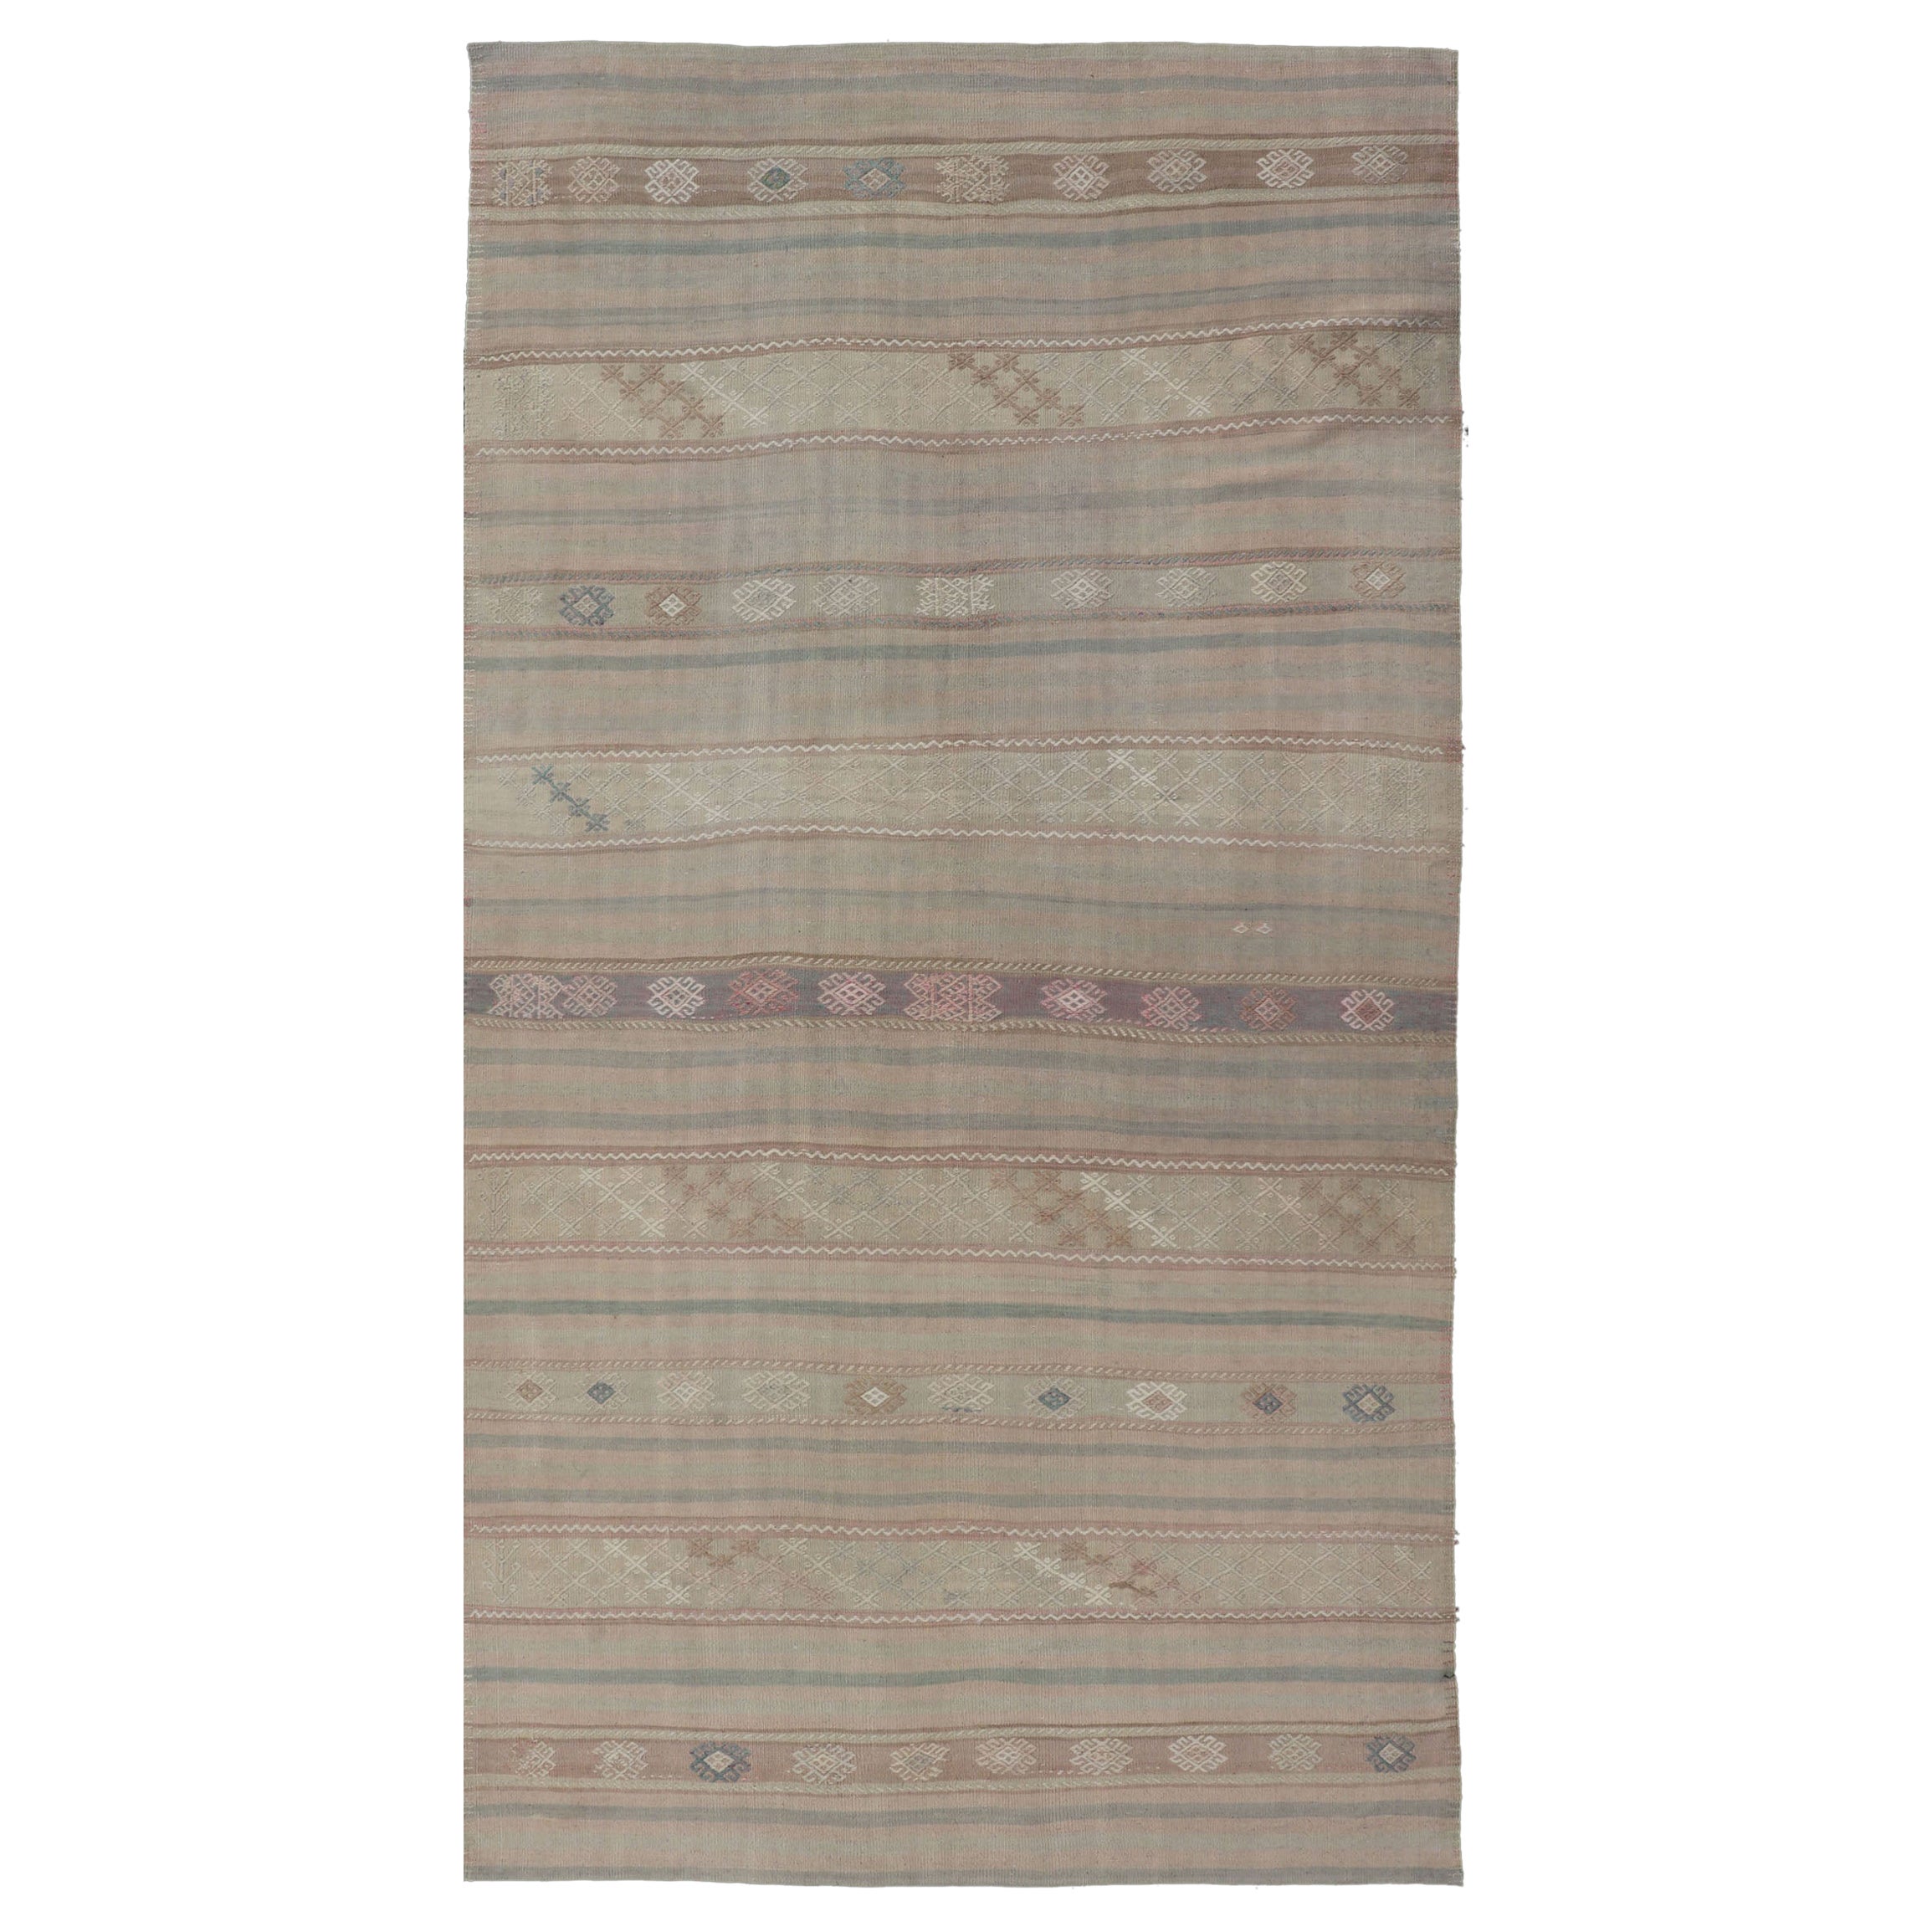 Flat-Weave Turkish Kilim with Embroideries in Earthy Tones and Hints of Pink For Sale